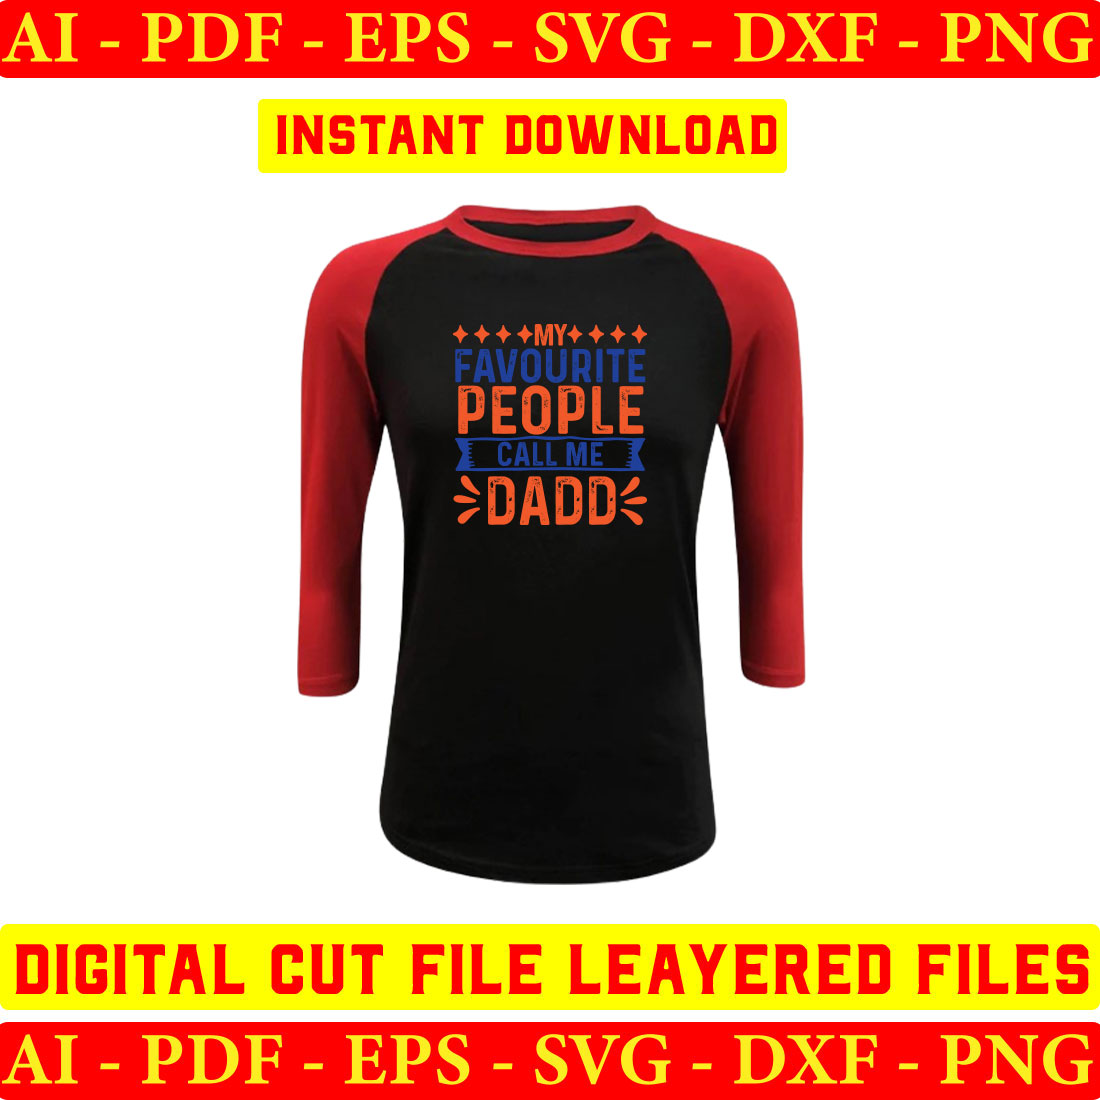 Black and red baseball shirt with people like dads on it.